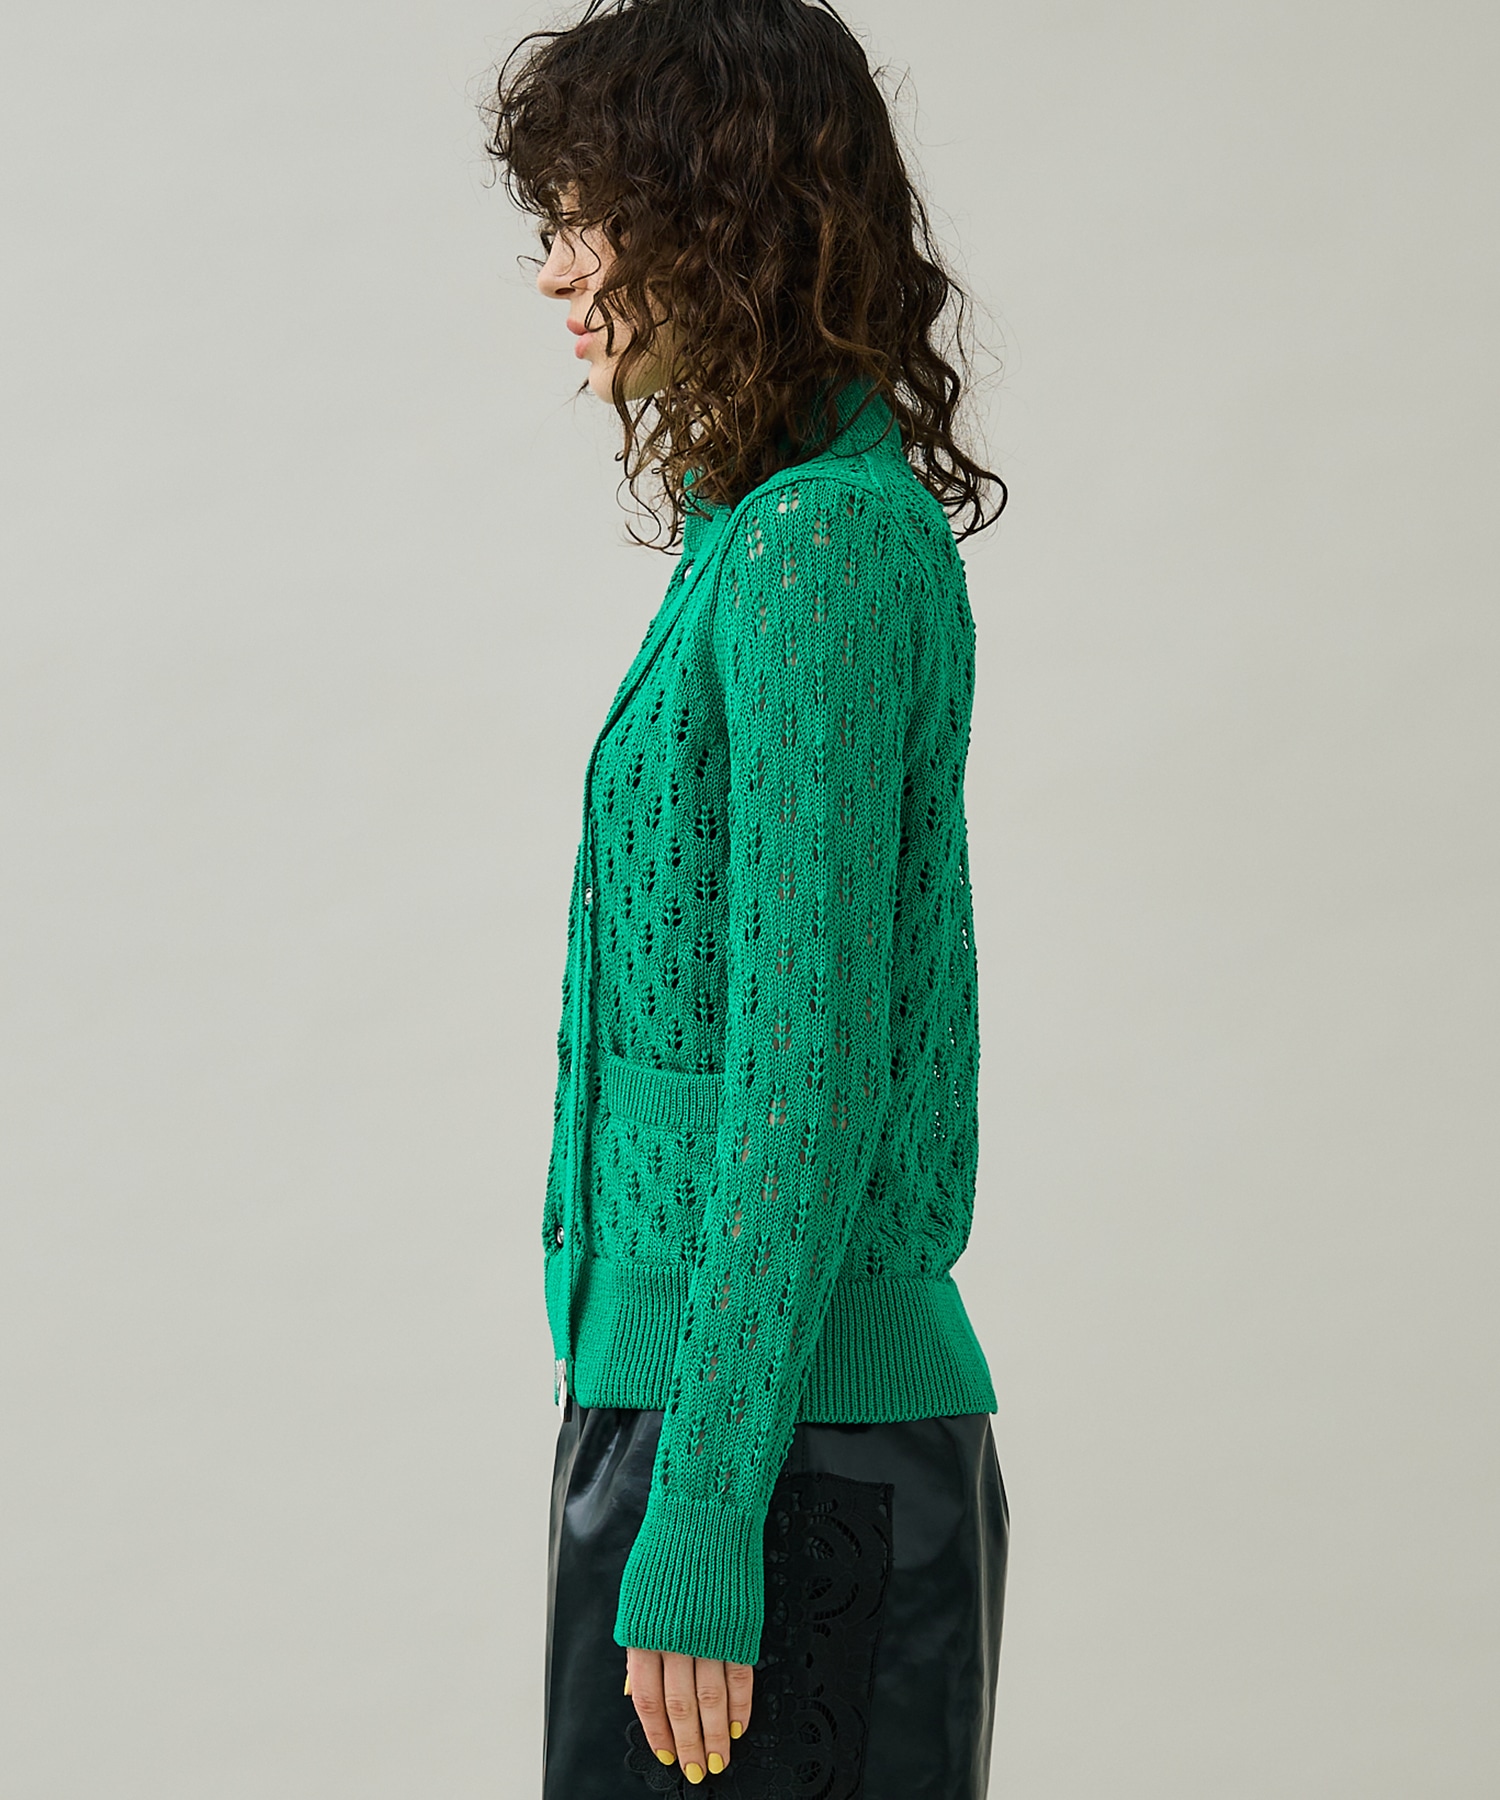 Lace knit cardigan(38 GREEN): TOGA PULLA: WOMENS｜ STUDIOUS ONLINE ...